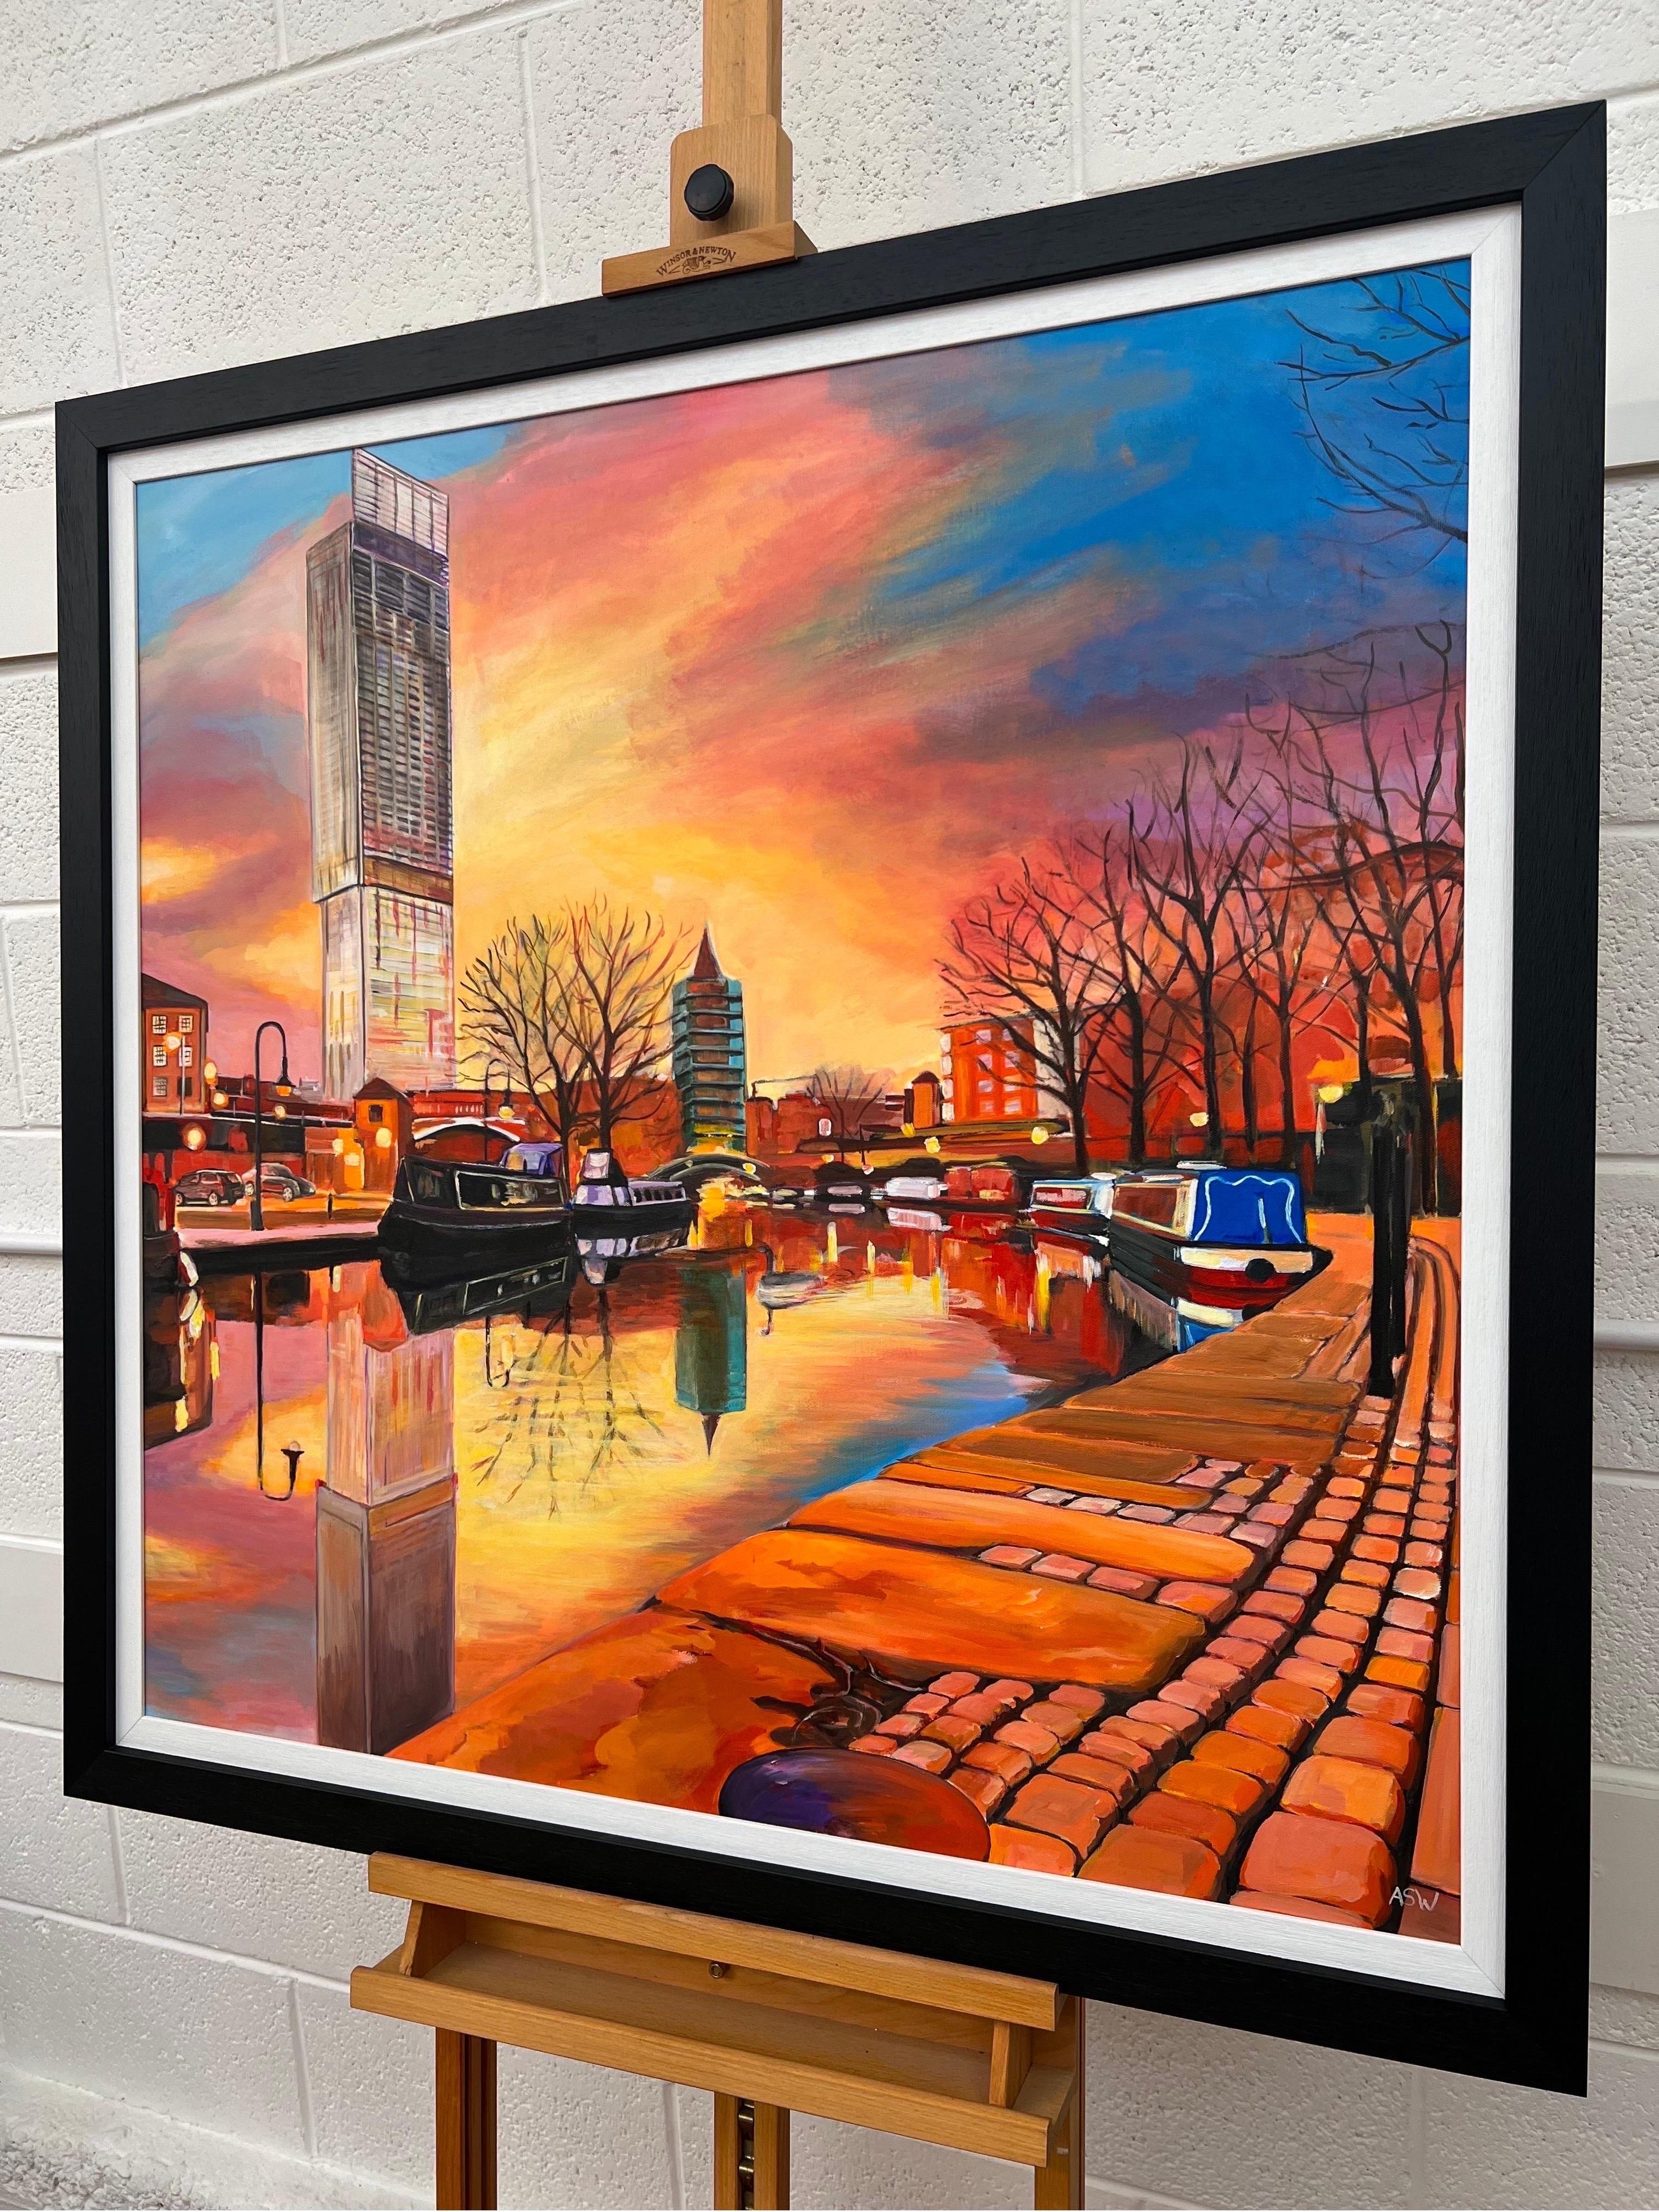 An Original Painting of Bridgewater Canal Scene in the Industrial City of Manchester, England, by British Cityscape Artist Angela Wakefield. It captures the changing nature of Manchester, both the old and the new. The characteristically damp